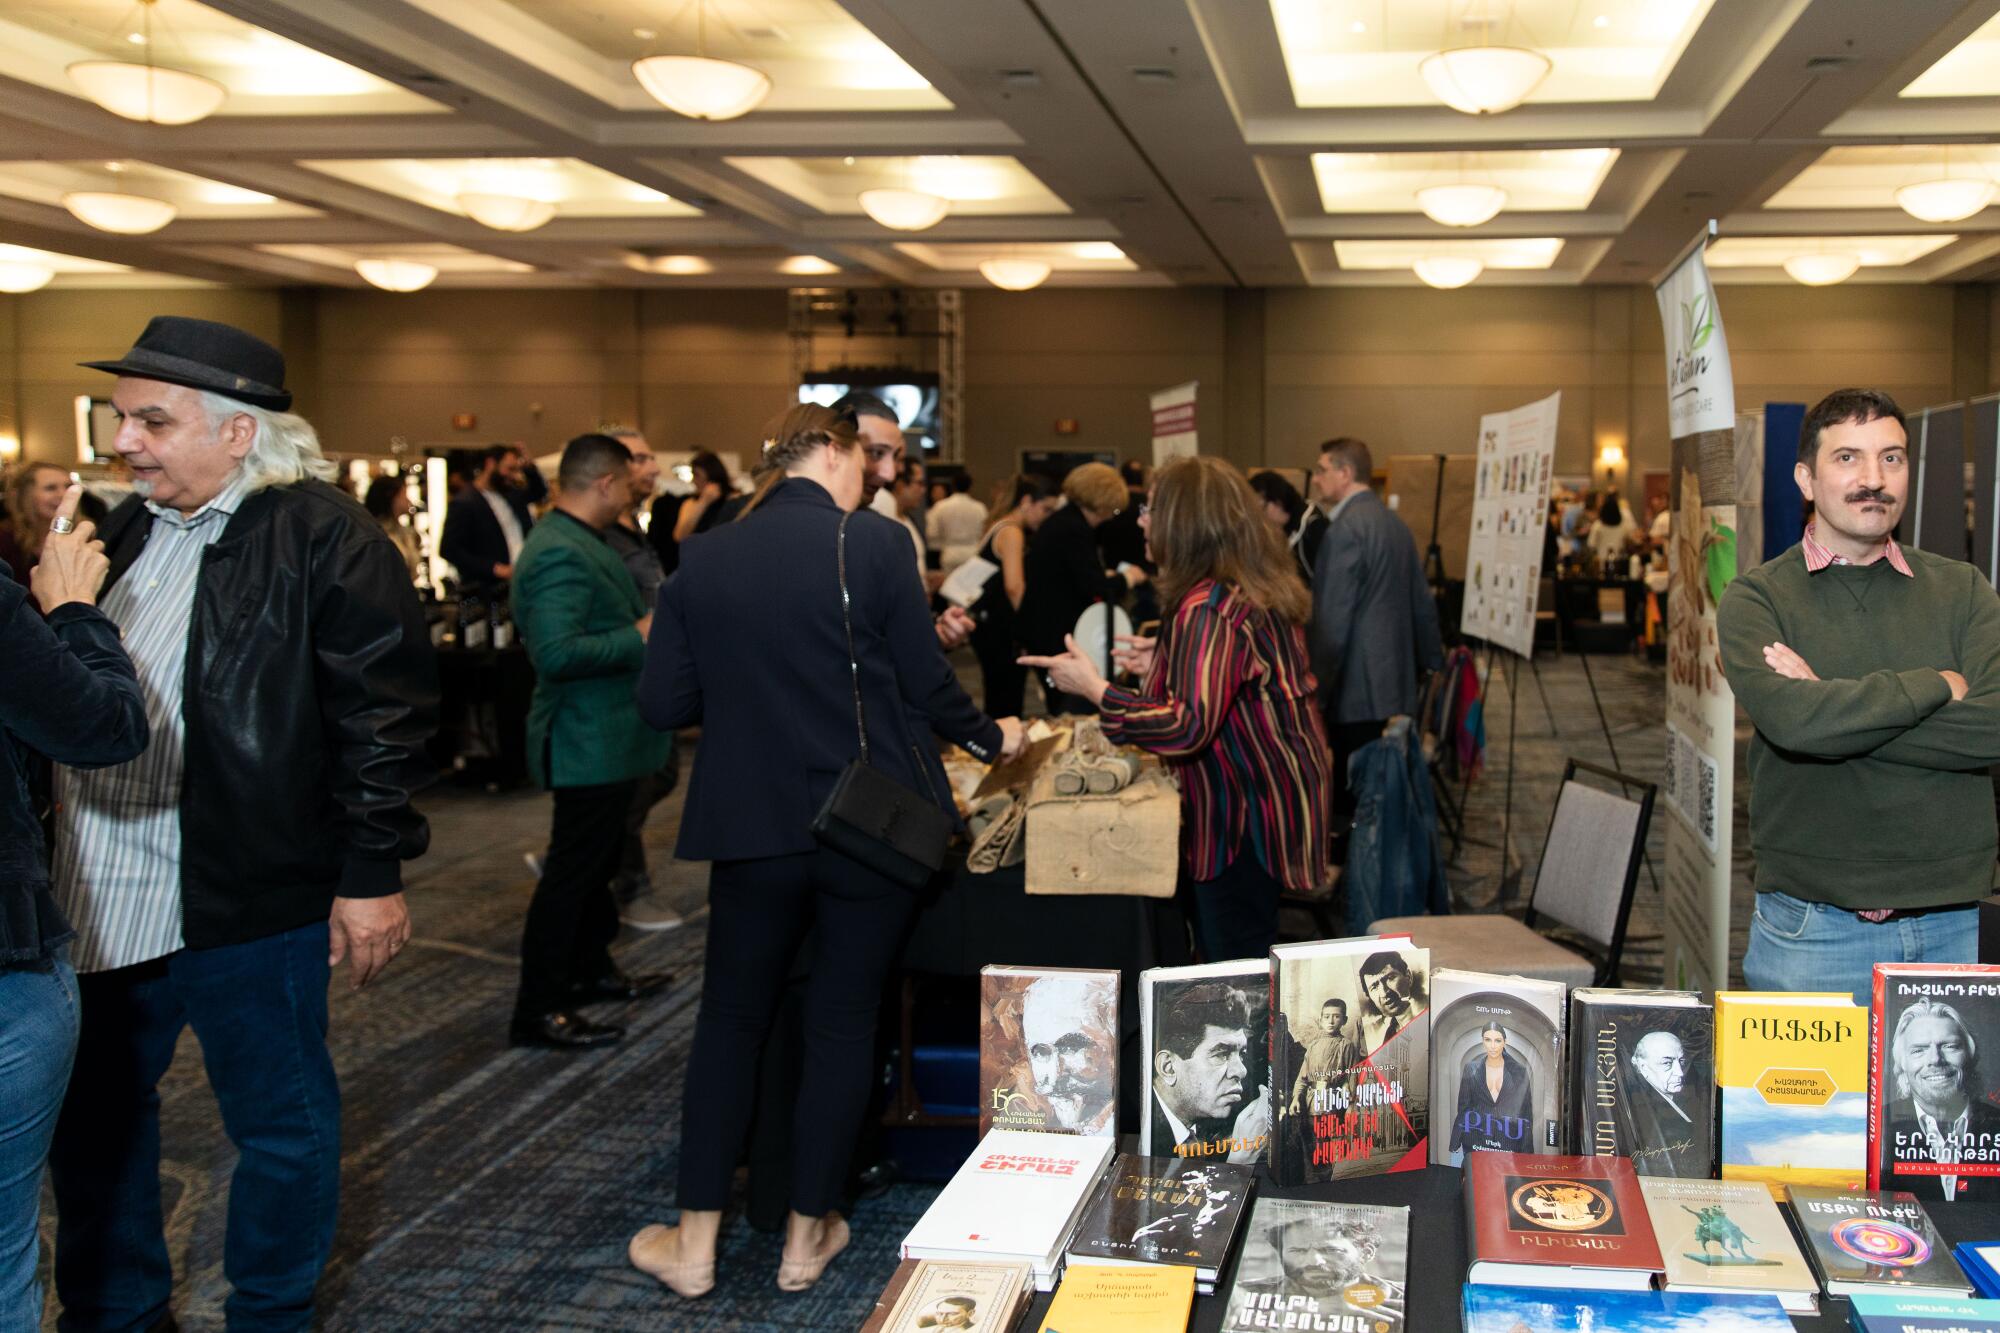 People stand in a room where tables display books and bottles of wine